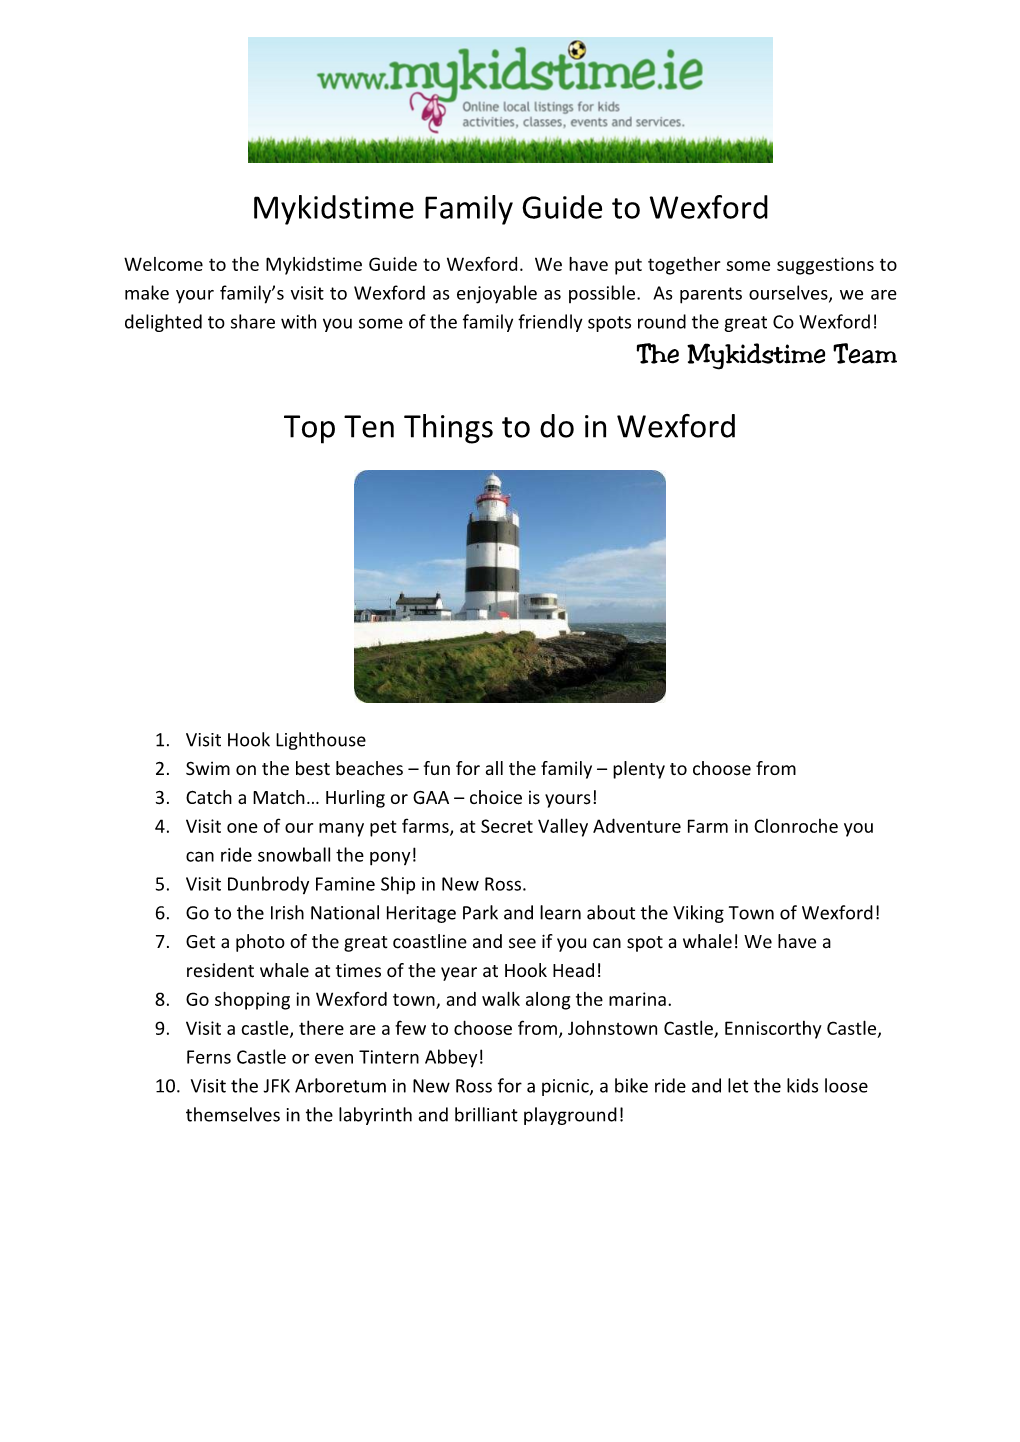 Mykidstime Family Guide to Wexford Top Ten Things to Do in Wexford